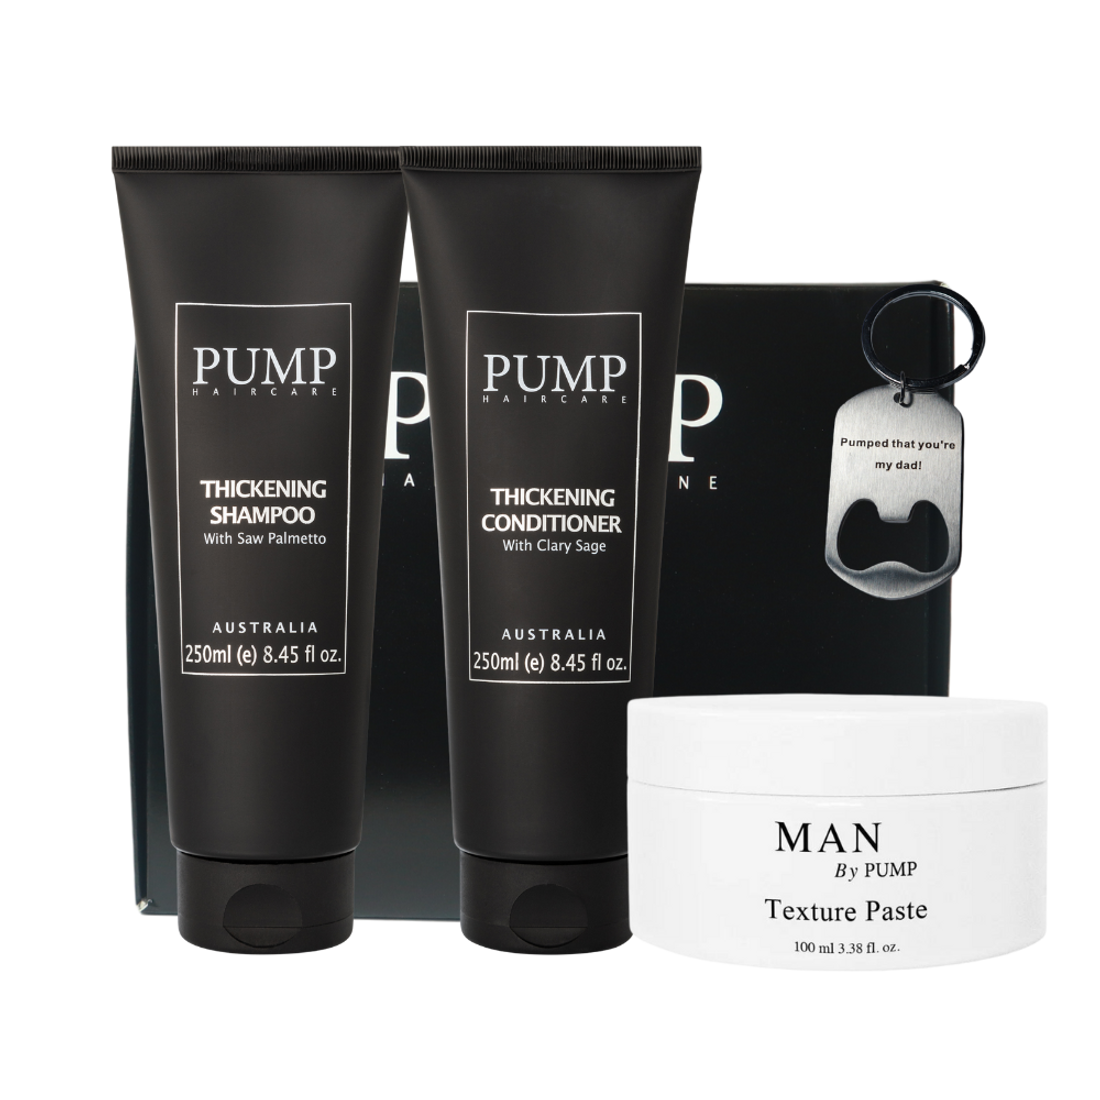 Pump Father's Day Thickening Pack